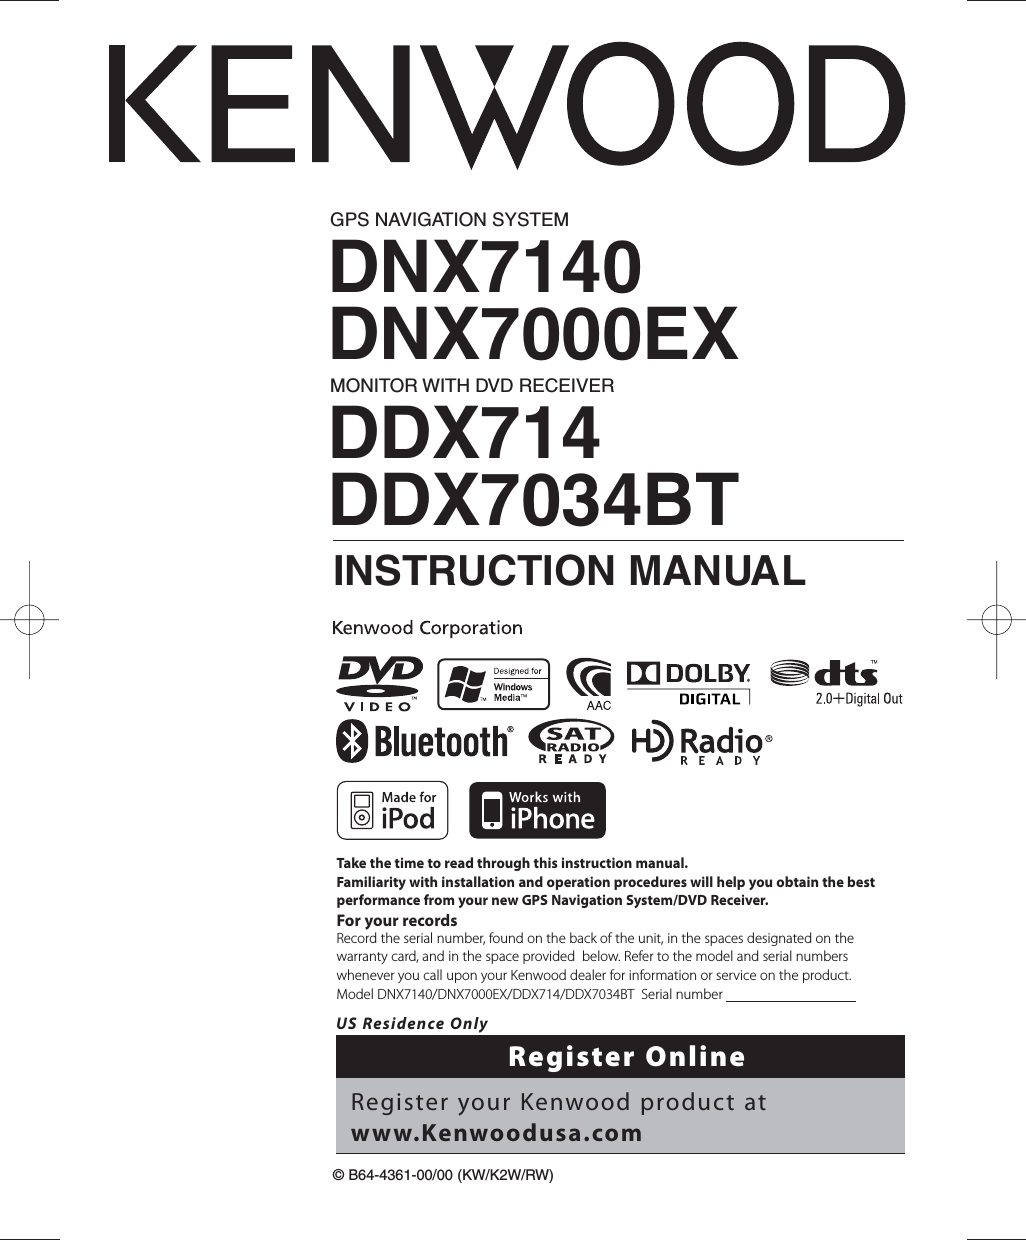 GPS NAVIGATION SYSTEMDNX7140DNX7000EXMONITOR WITH DVD RECEIVERDDX714DDX7034BTINSTRUCTION MANUAL©B64-4361-00/00 (KW/K2W/RW)Take the time to read through this instruction manual.Familiarity with installation and operation procedures will help you obtain the best performance from your new GPS Navigation System/DVD Receiver.For your recordsRecord the serial number, found on the back of the unit, in the spaces designated on the warranty card, and in the space provided  below. Refer to the model and serial numbers whenever you call upon your Kenwood dealer for information or service on the product.Model DNX7140/DNX7000EX/DDX714/DDX7034BT  Serial number                                      US Residence OnlyRegister OnlineRegister your Kenwood product at www.Kenwoodusa.com